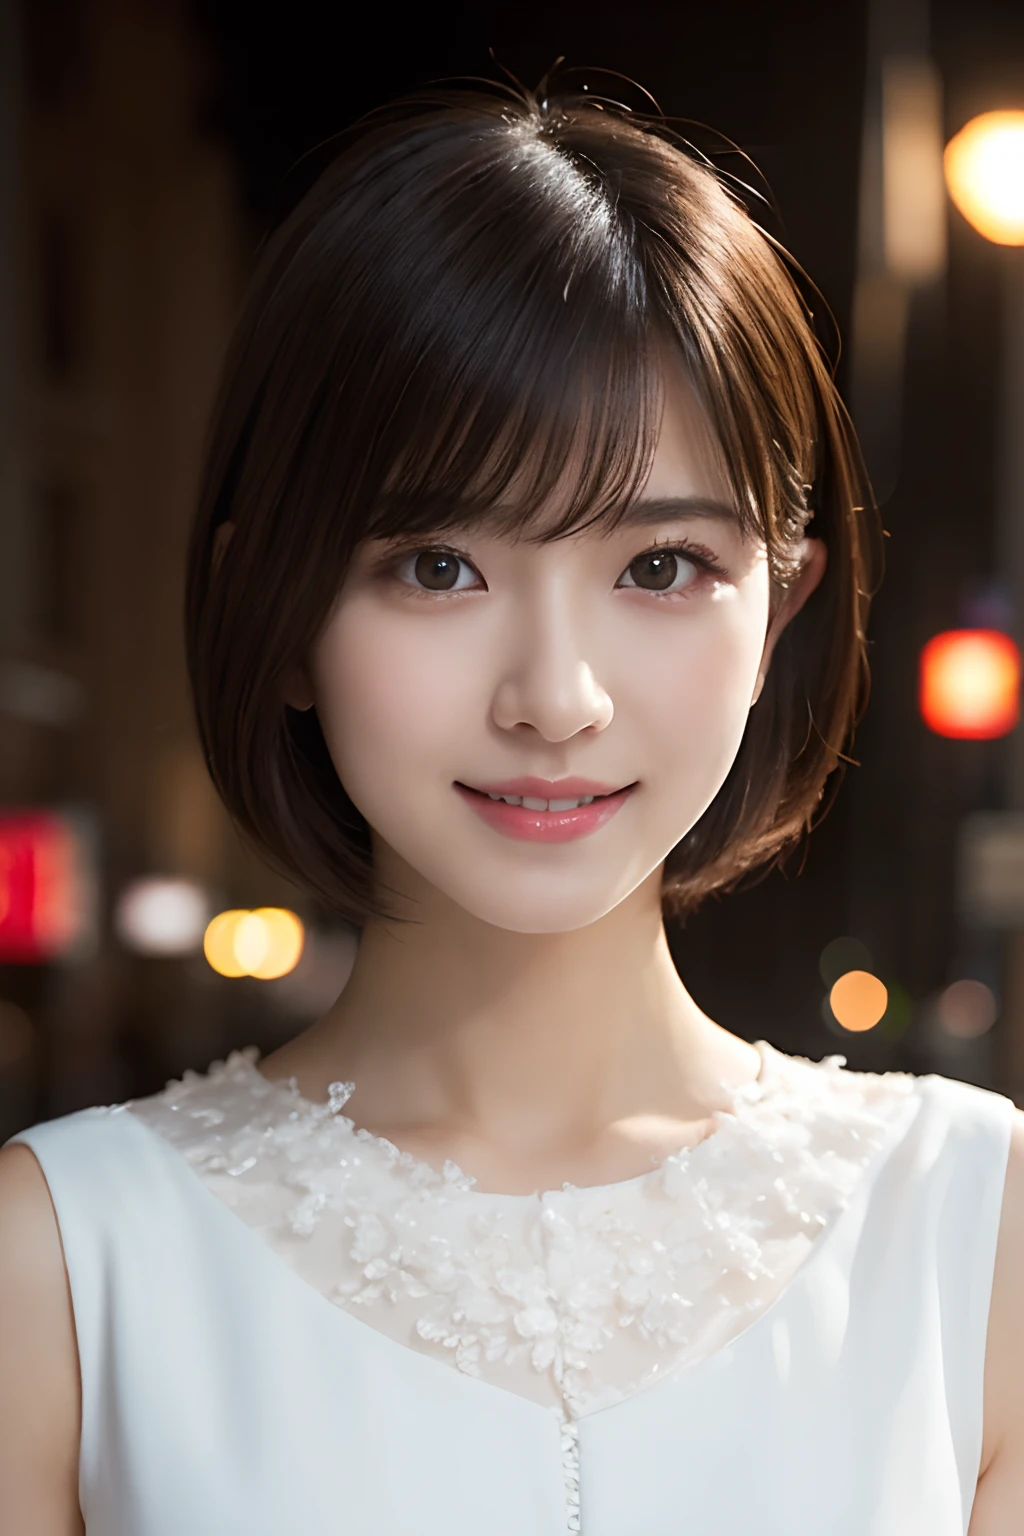 1girl in, (Wearing a white classy dress:1.2), (Raw photo, Best Quality), (Realistic, Photorealsitic:1.4), masutepiece, Extremely delicate and beautiful, Extremely detailed, 2k wallpaper, amazing, finely detail, the Extremely Detailed CG Unity 8K Wallpapers, Ultra-detailed, hight resolution, Soft light, Beautiful detailed girl, extremely detailed eye and face, beautiful detailed nose, Beautiful detailed eyes, short hair, 
bangs, Classy rounded bob, Cinematic lighting, city light at night, Perfect Anatomy, Slender body, Smiling